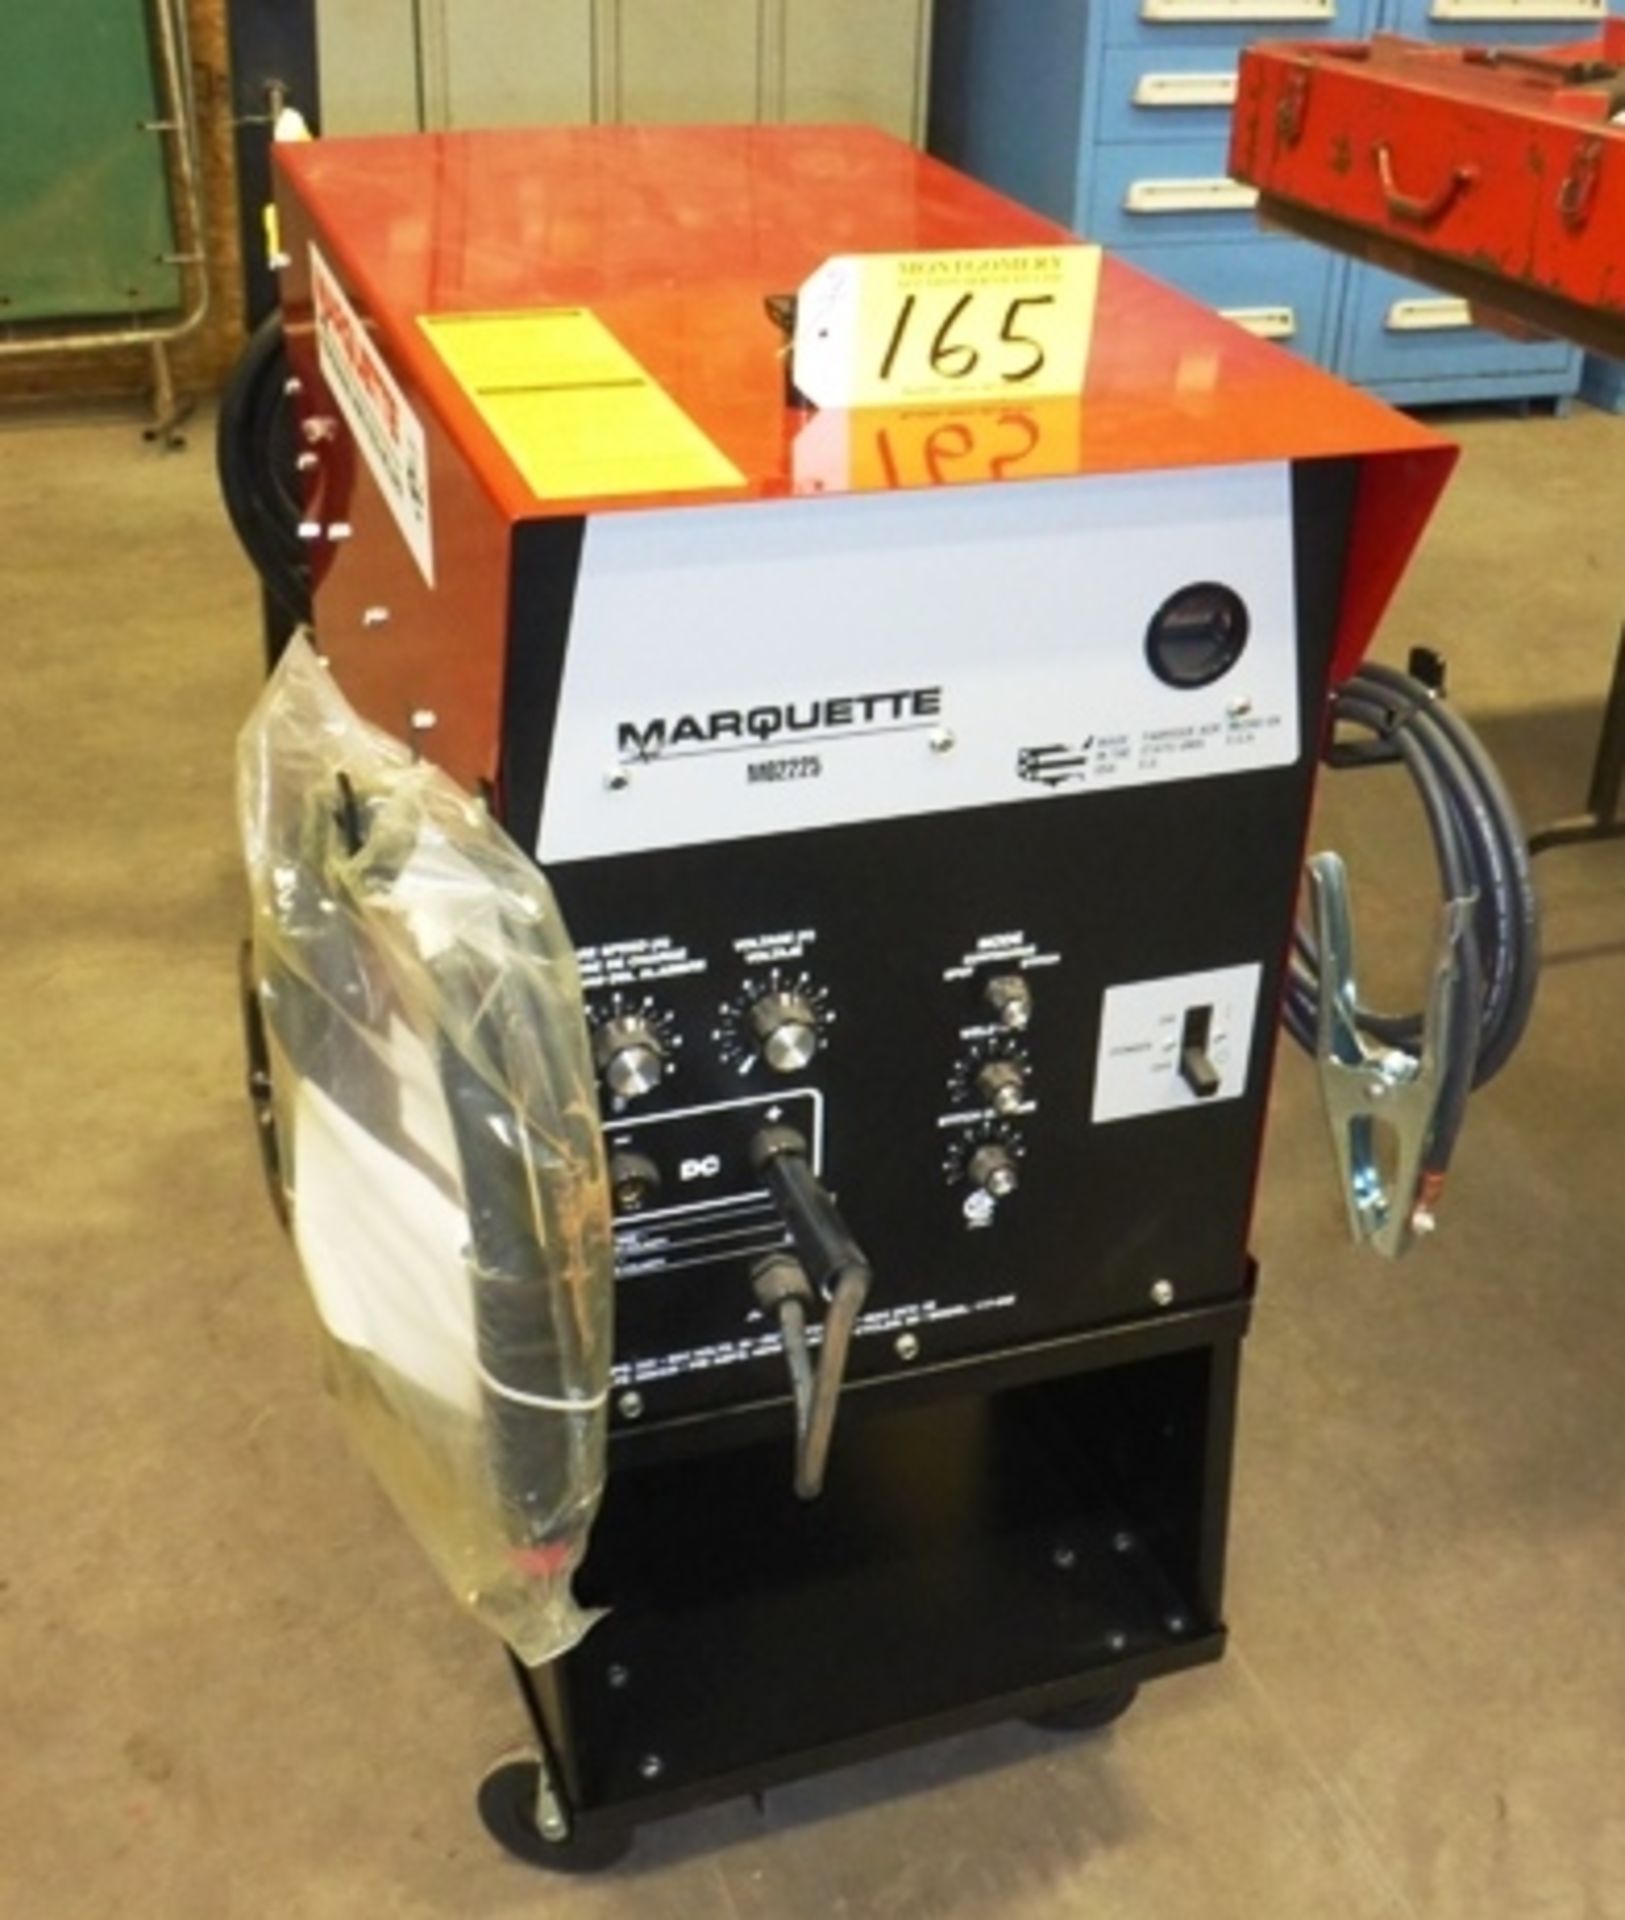 MARQUETTE PRO WIRE FEED WELDER M02225 (NEW) W/ CART & CABLES M# 117-042 1PH 225AMP